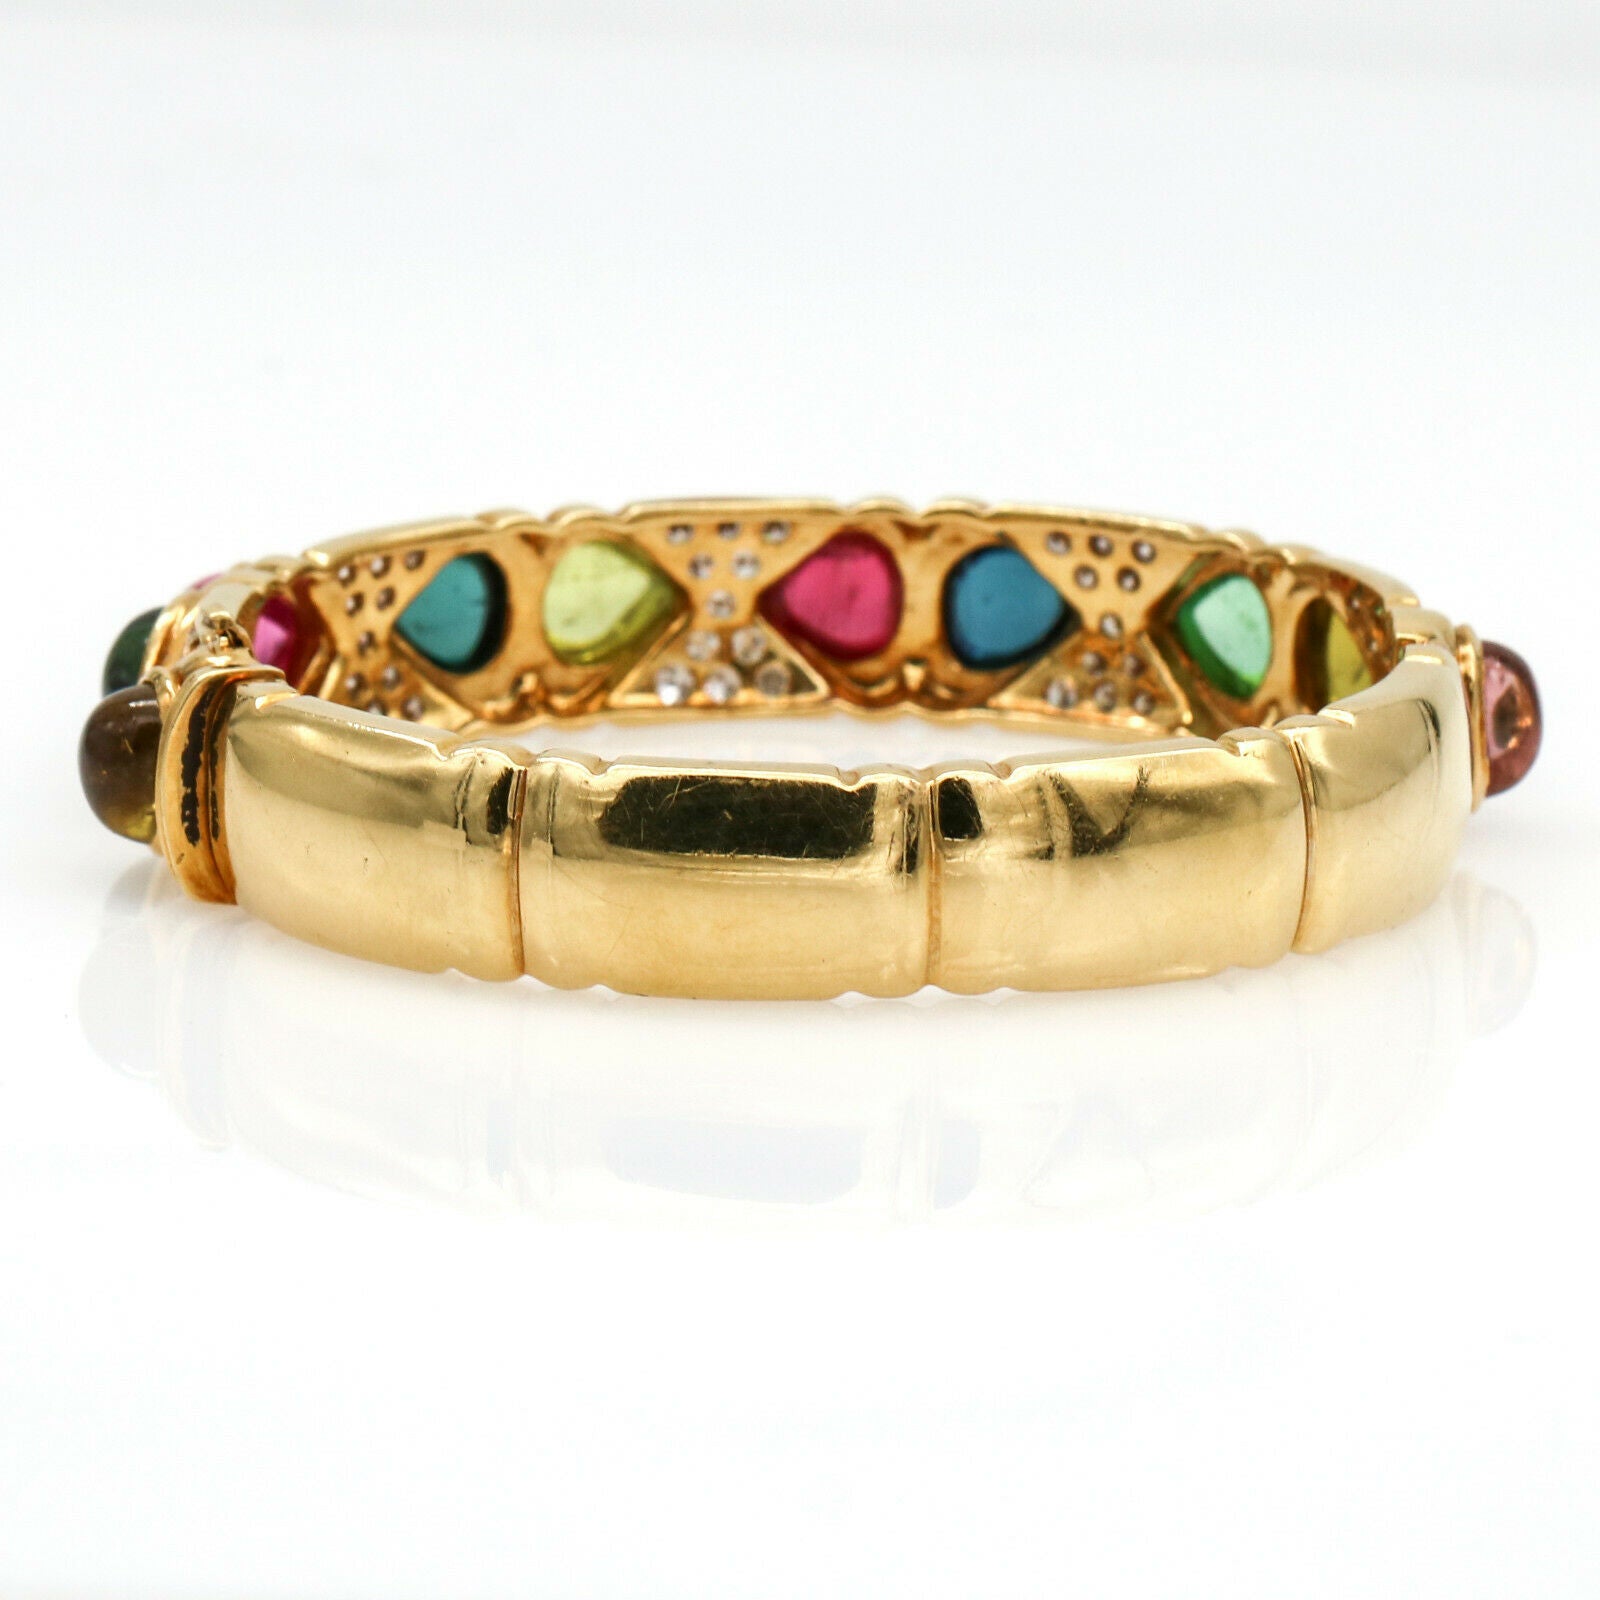 Signed Colorful Tourmaline and Diamond Hinged Bangle Bracelet in 18k Yellow Gold